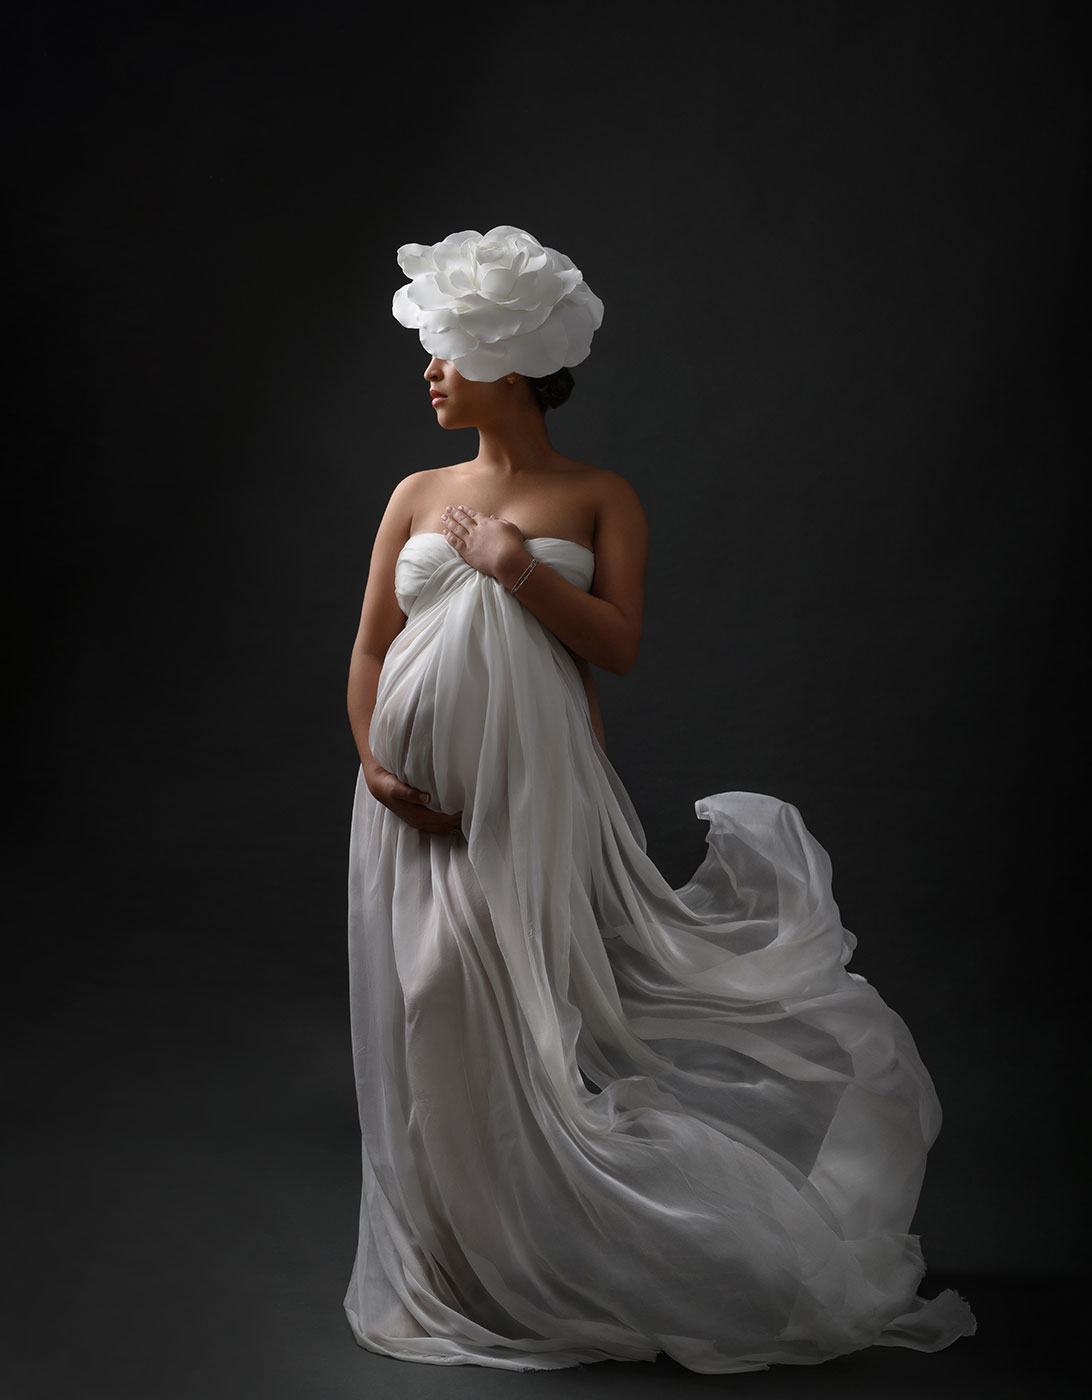 fine art maternity photography with flowing white silks and floral accessory